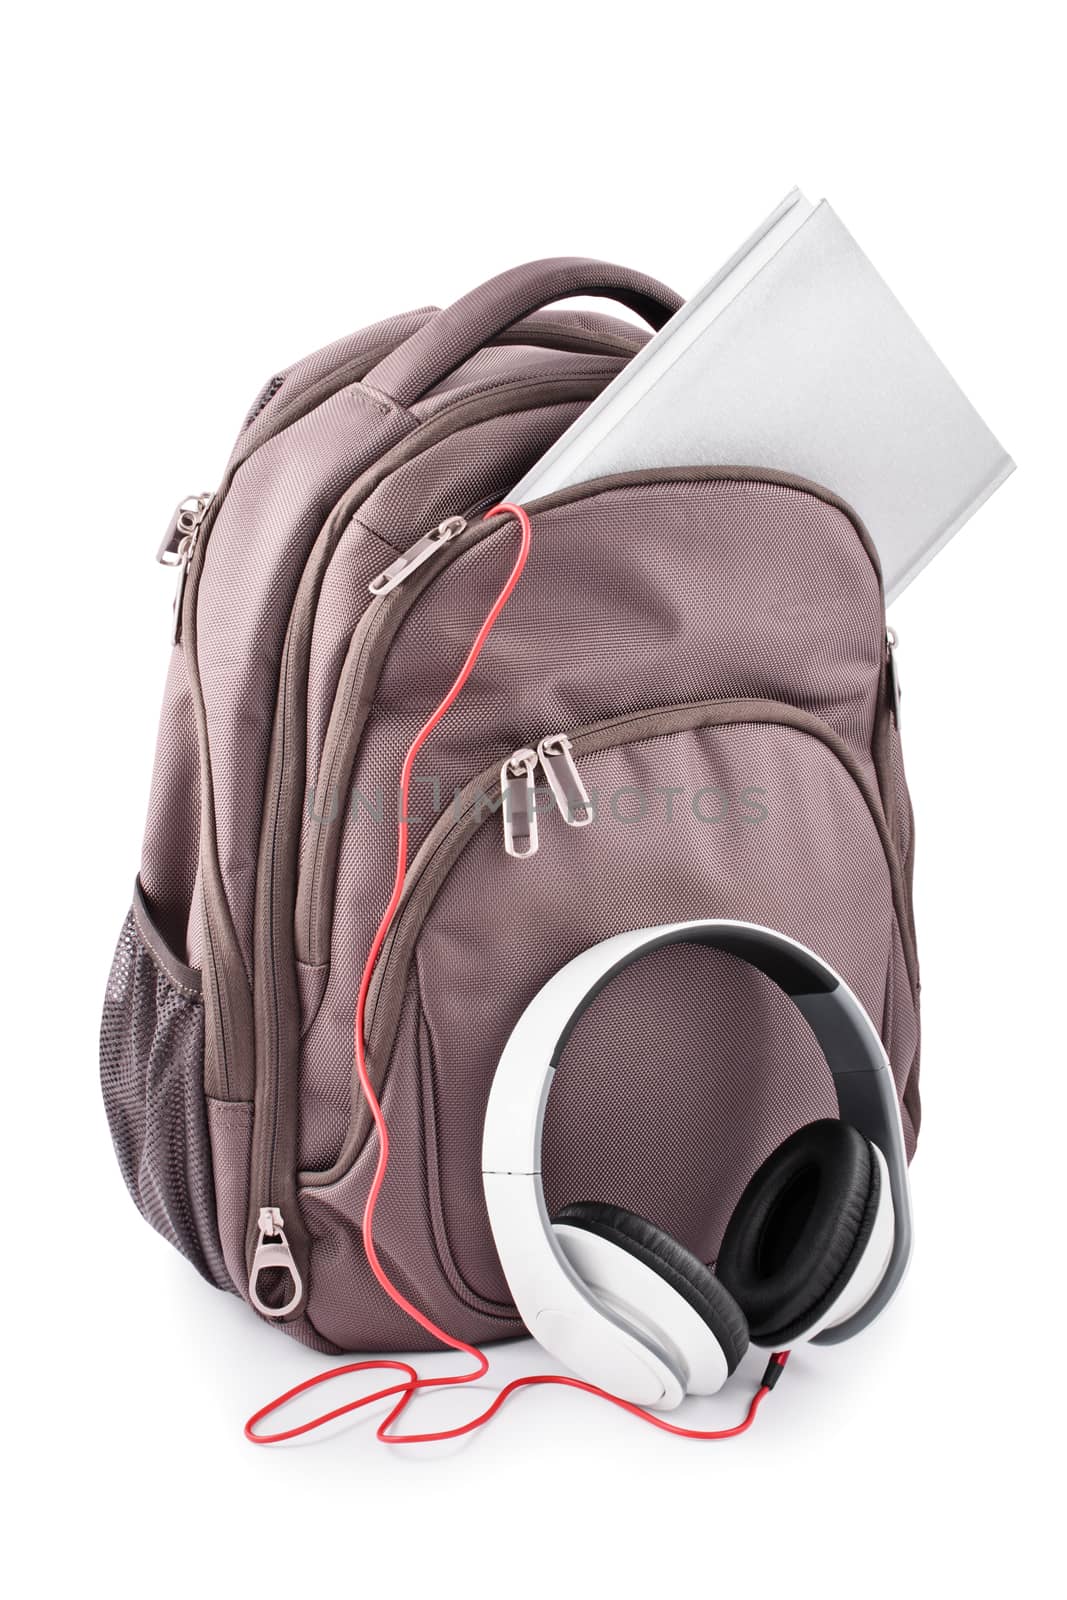 Backpack with headphones and notebook by Mendelex